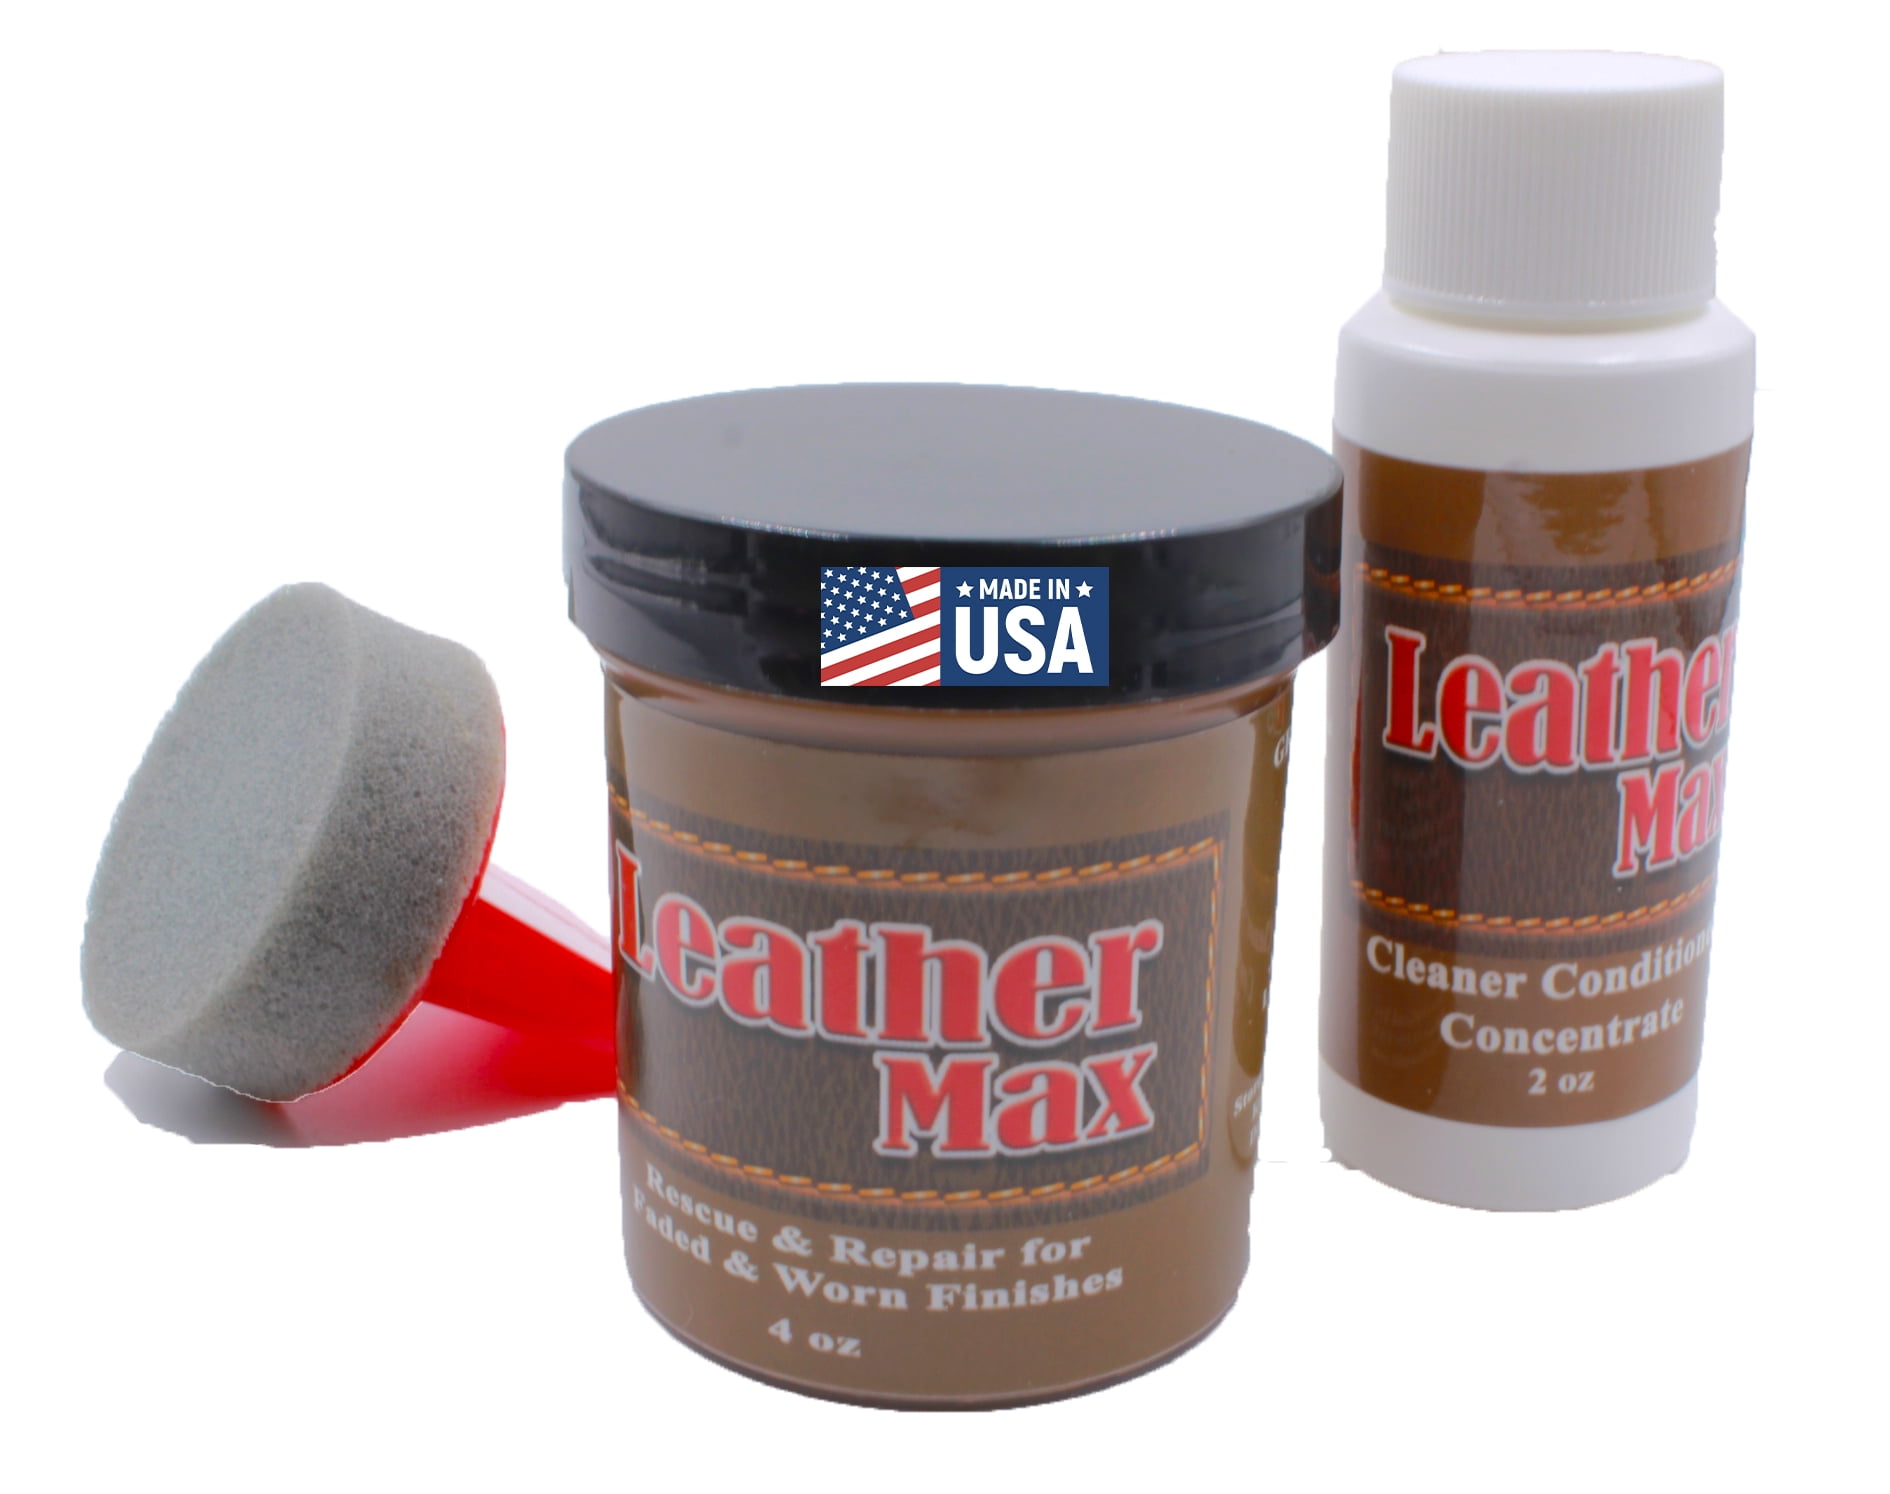 Leather Repair Kits That Truly Produce Professional Quality Results!